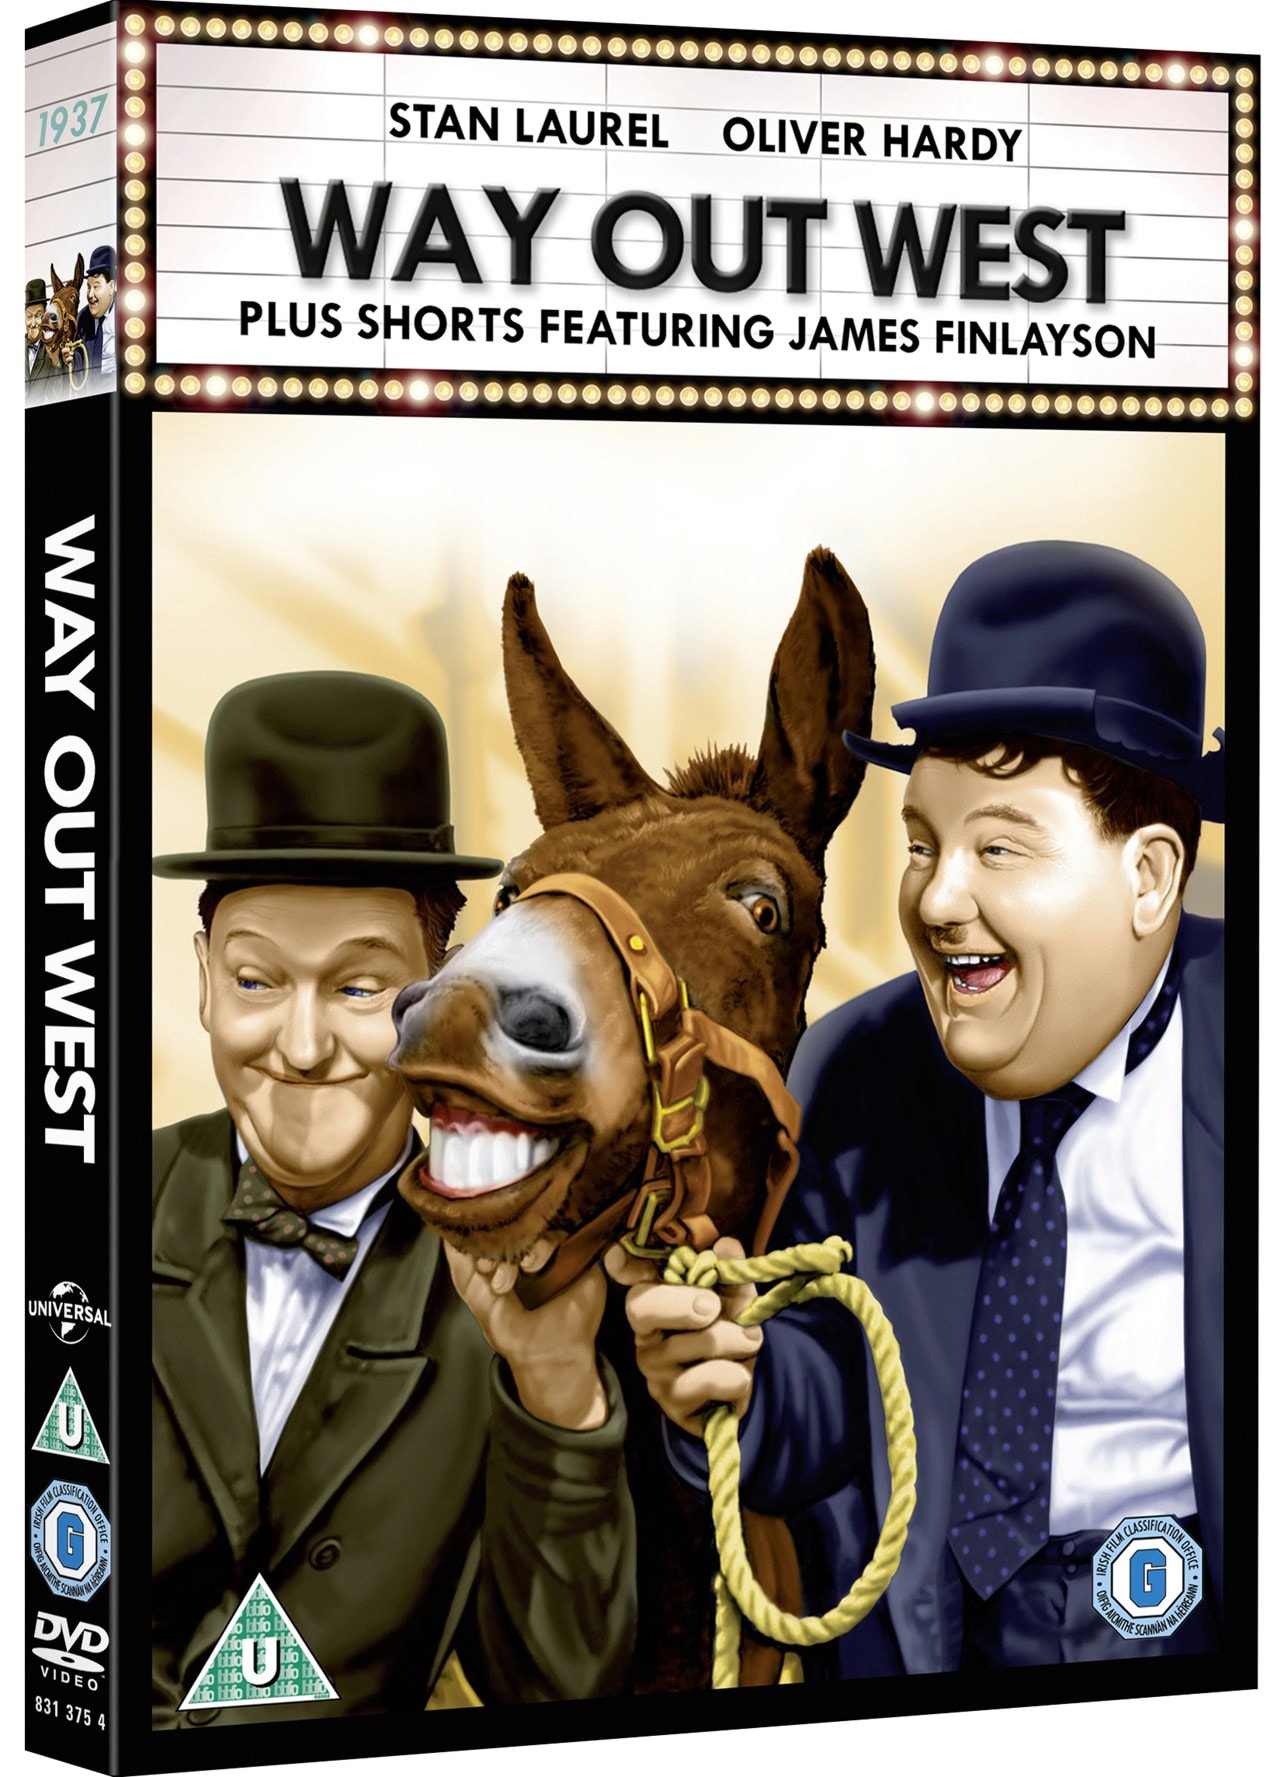 Way Out West DVD Free shipping over £20 HMV Store